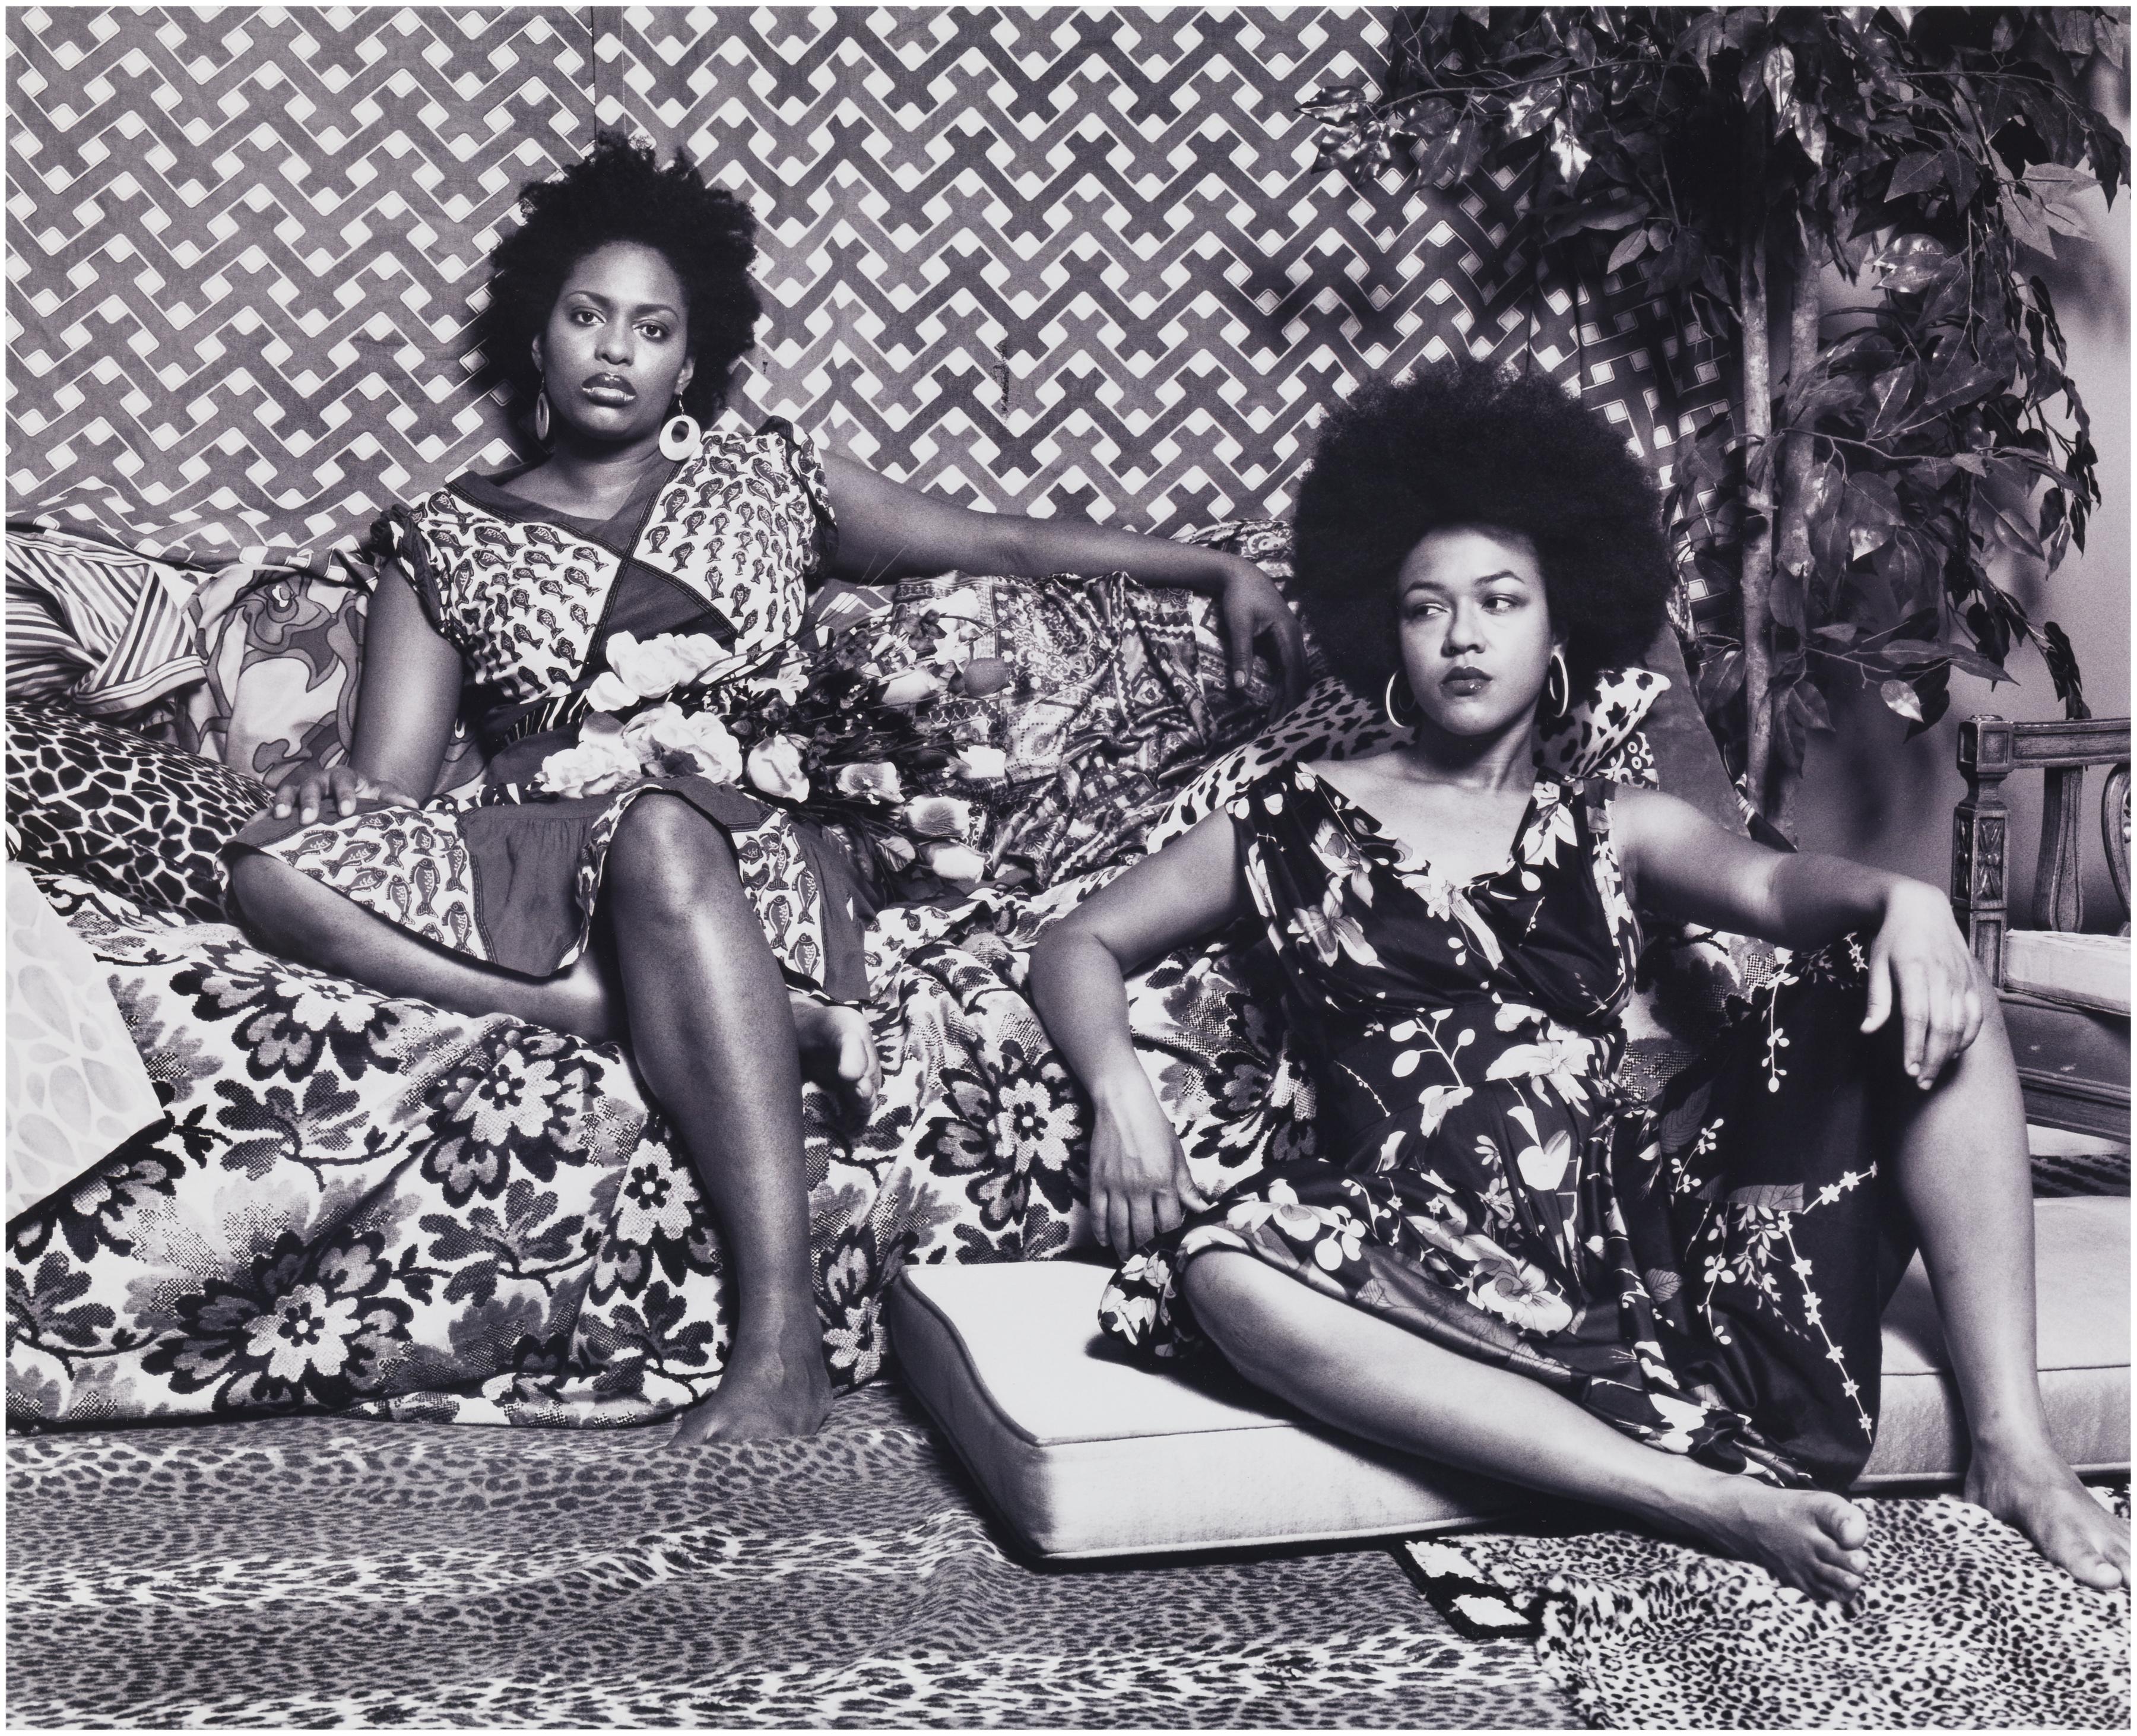 Two Black woman sit—one on a couch, one on a cushion on the floor—in a room filled with fabrics and rugs of many different patterns.